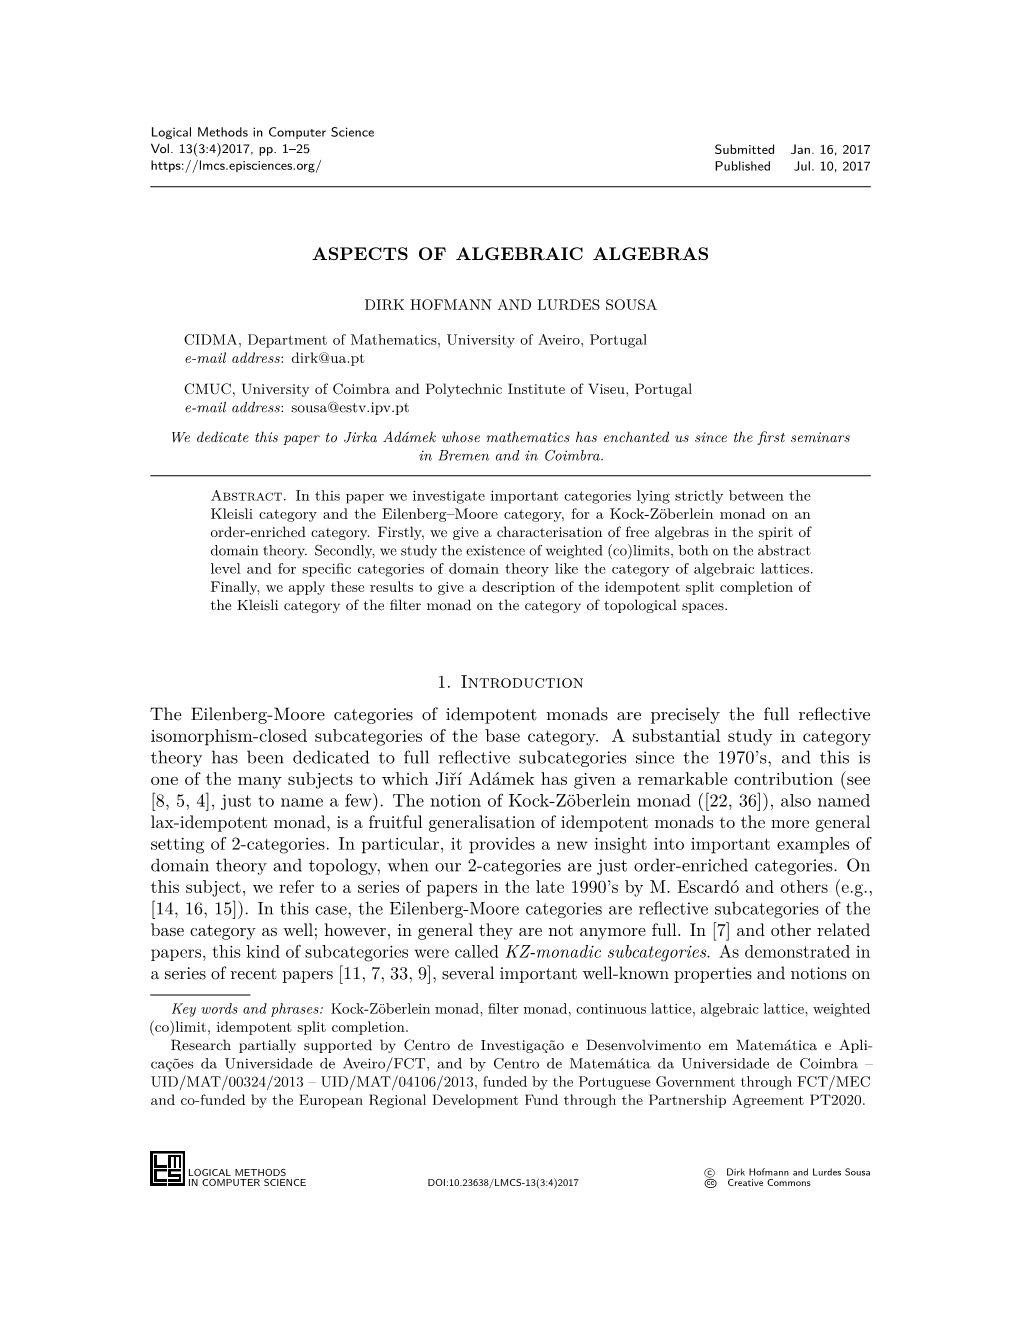 ASPECTS of ALGEBRAIC ALGEBRAS 1. Introduction the Eilenberg-Moore Categories of Idempotent Monads Are Precisely the Full Reflect